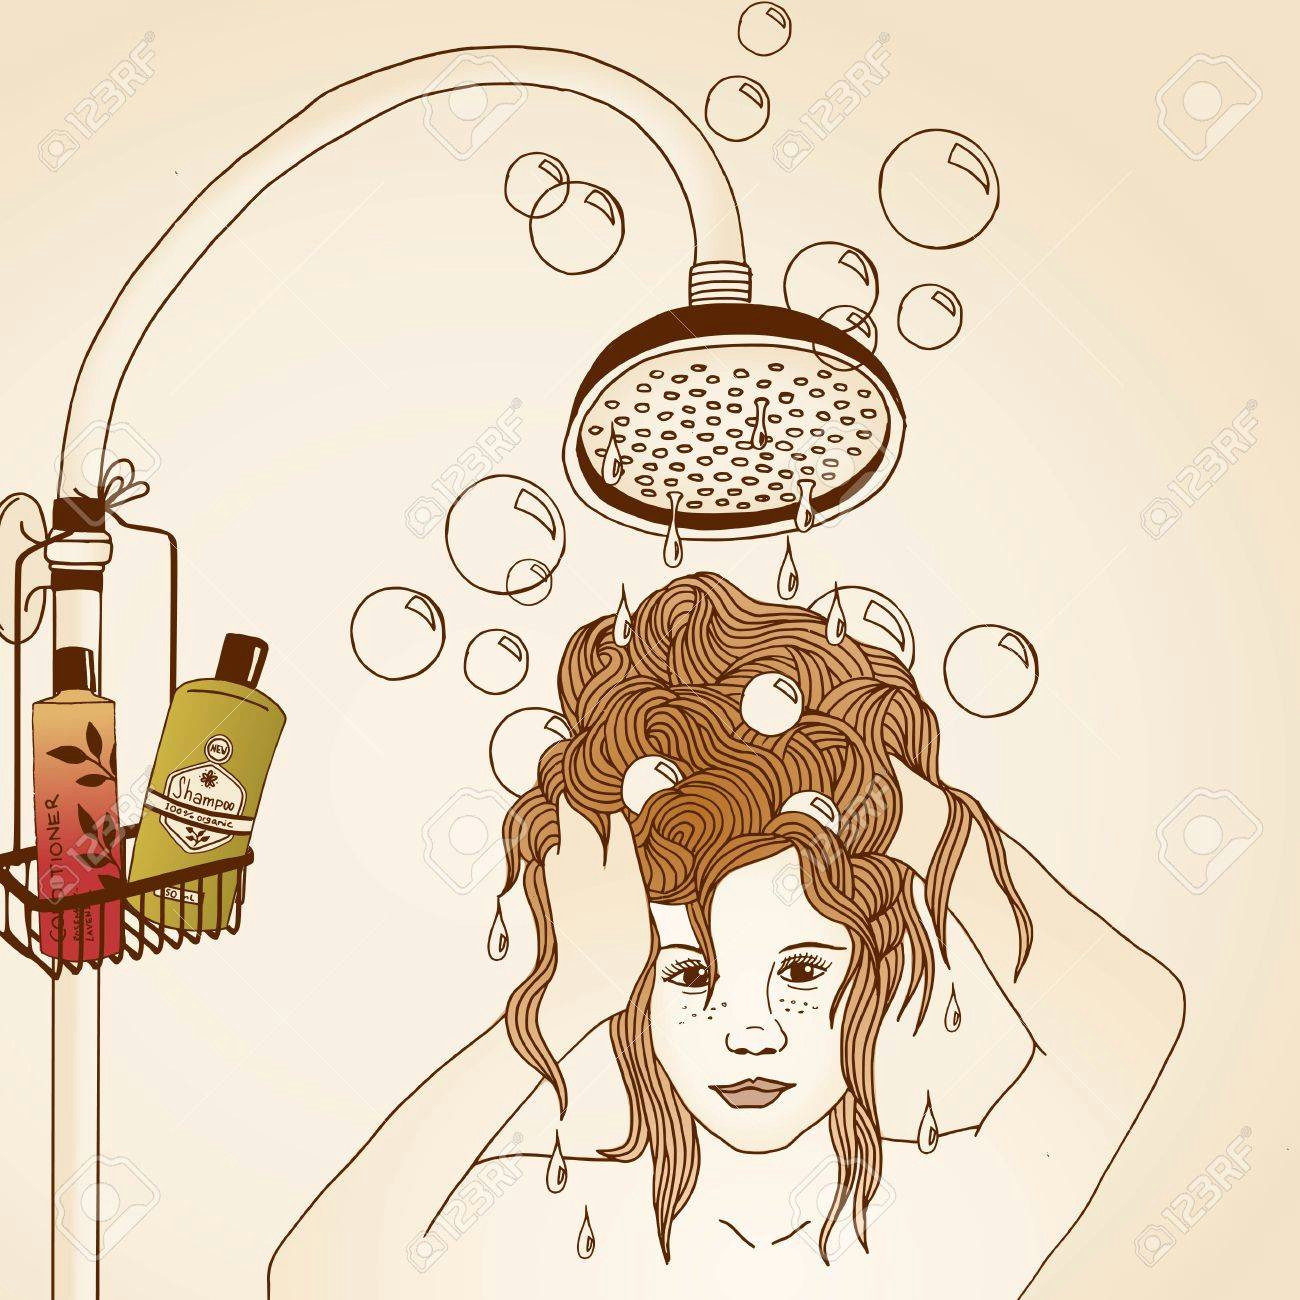 hair care illustration no 13 colored stock vector 48042828